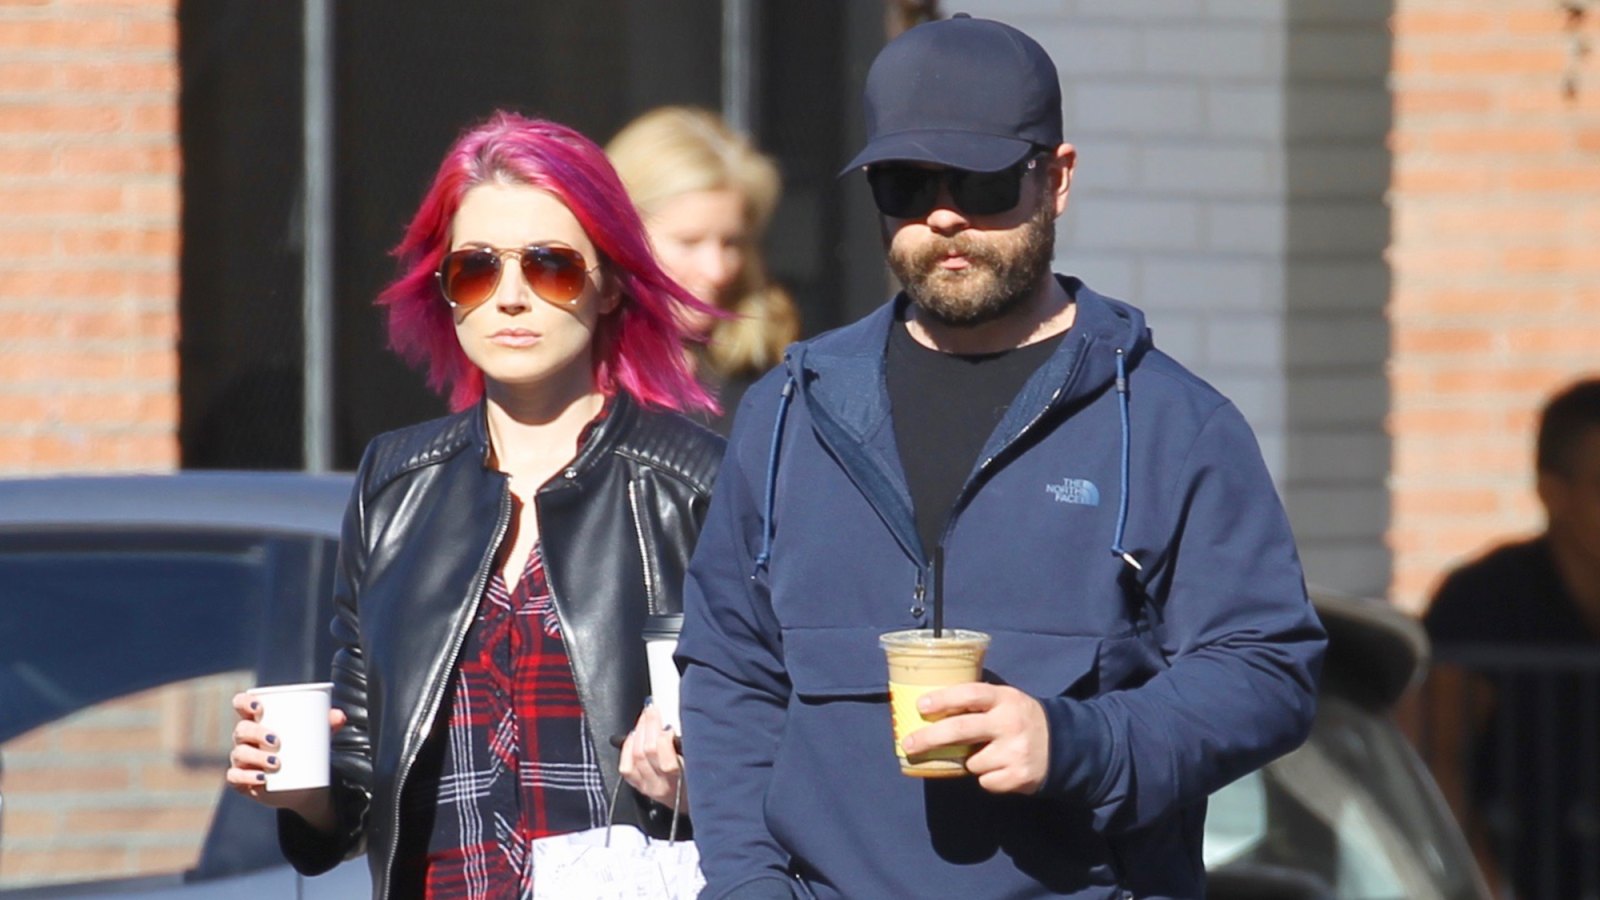 Jack Osbourne was spotted grabbing coffee with a female companion in Studio City.